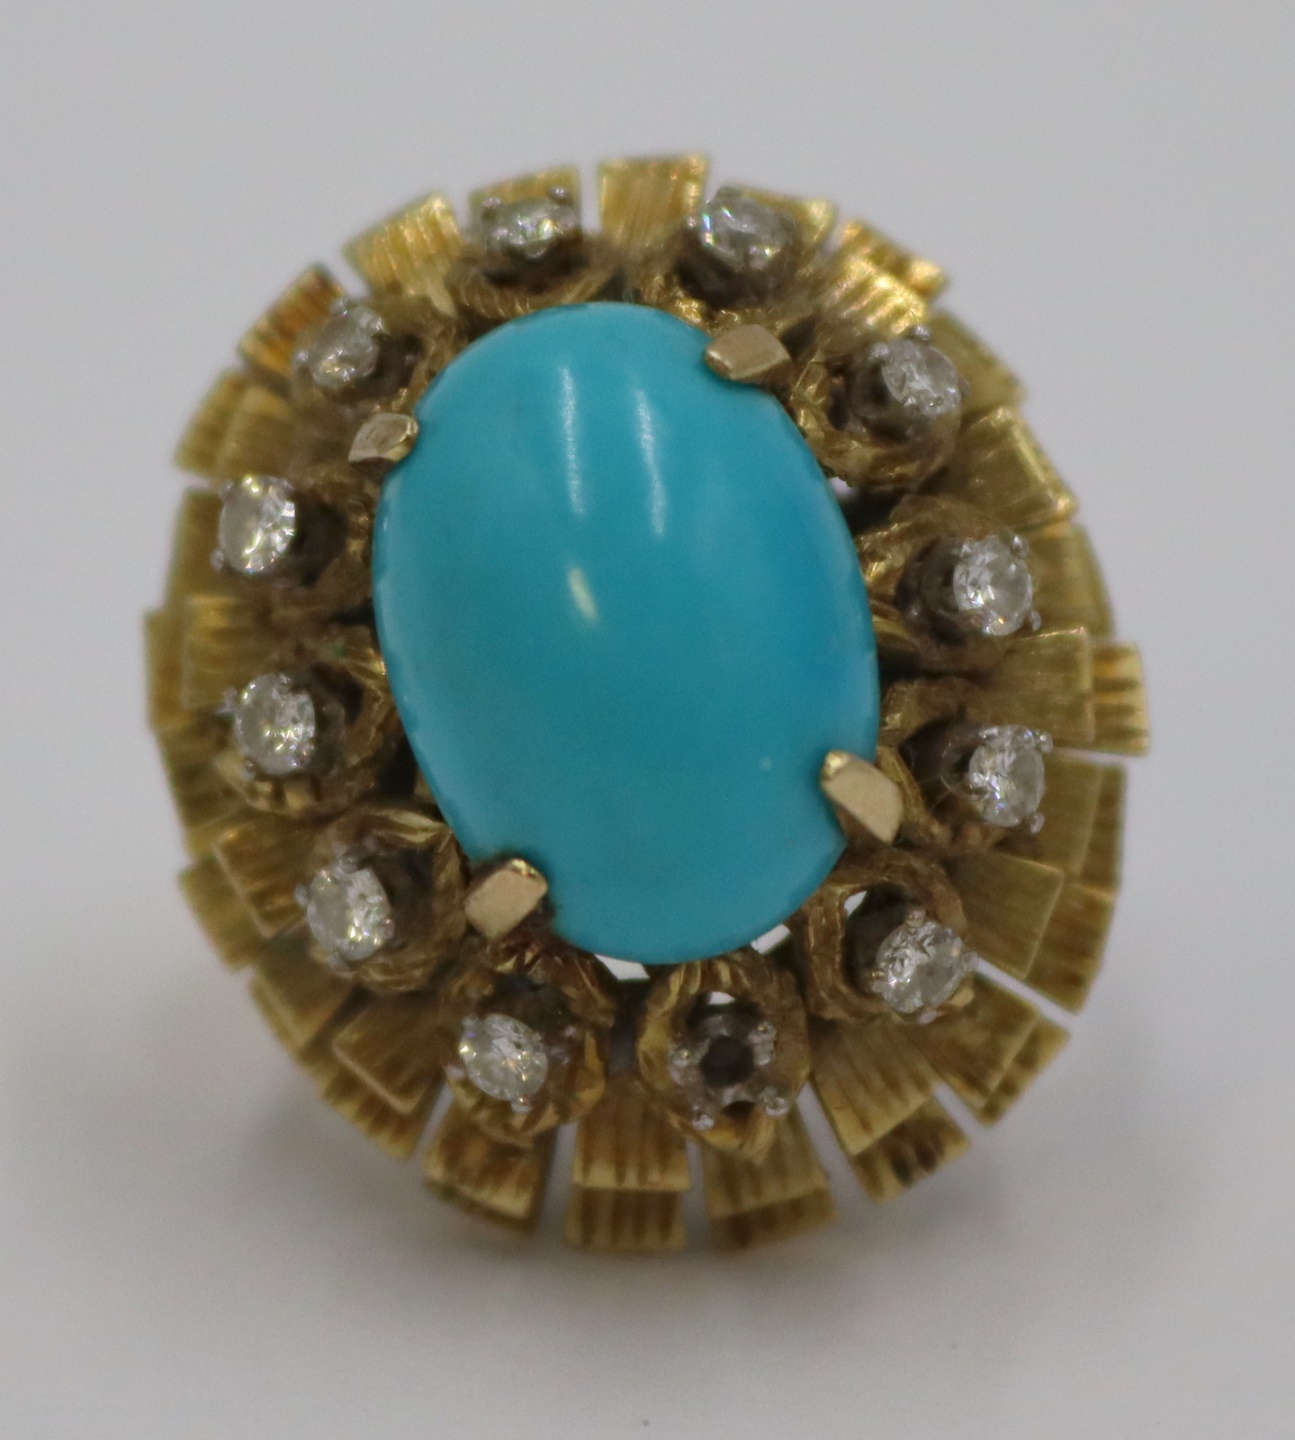 JEWELRY. SIGNED 14KT GOLD, TURQUOISE,